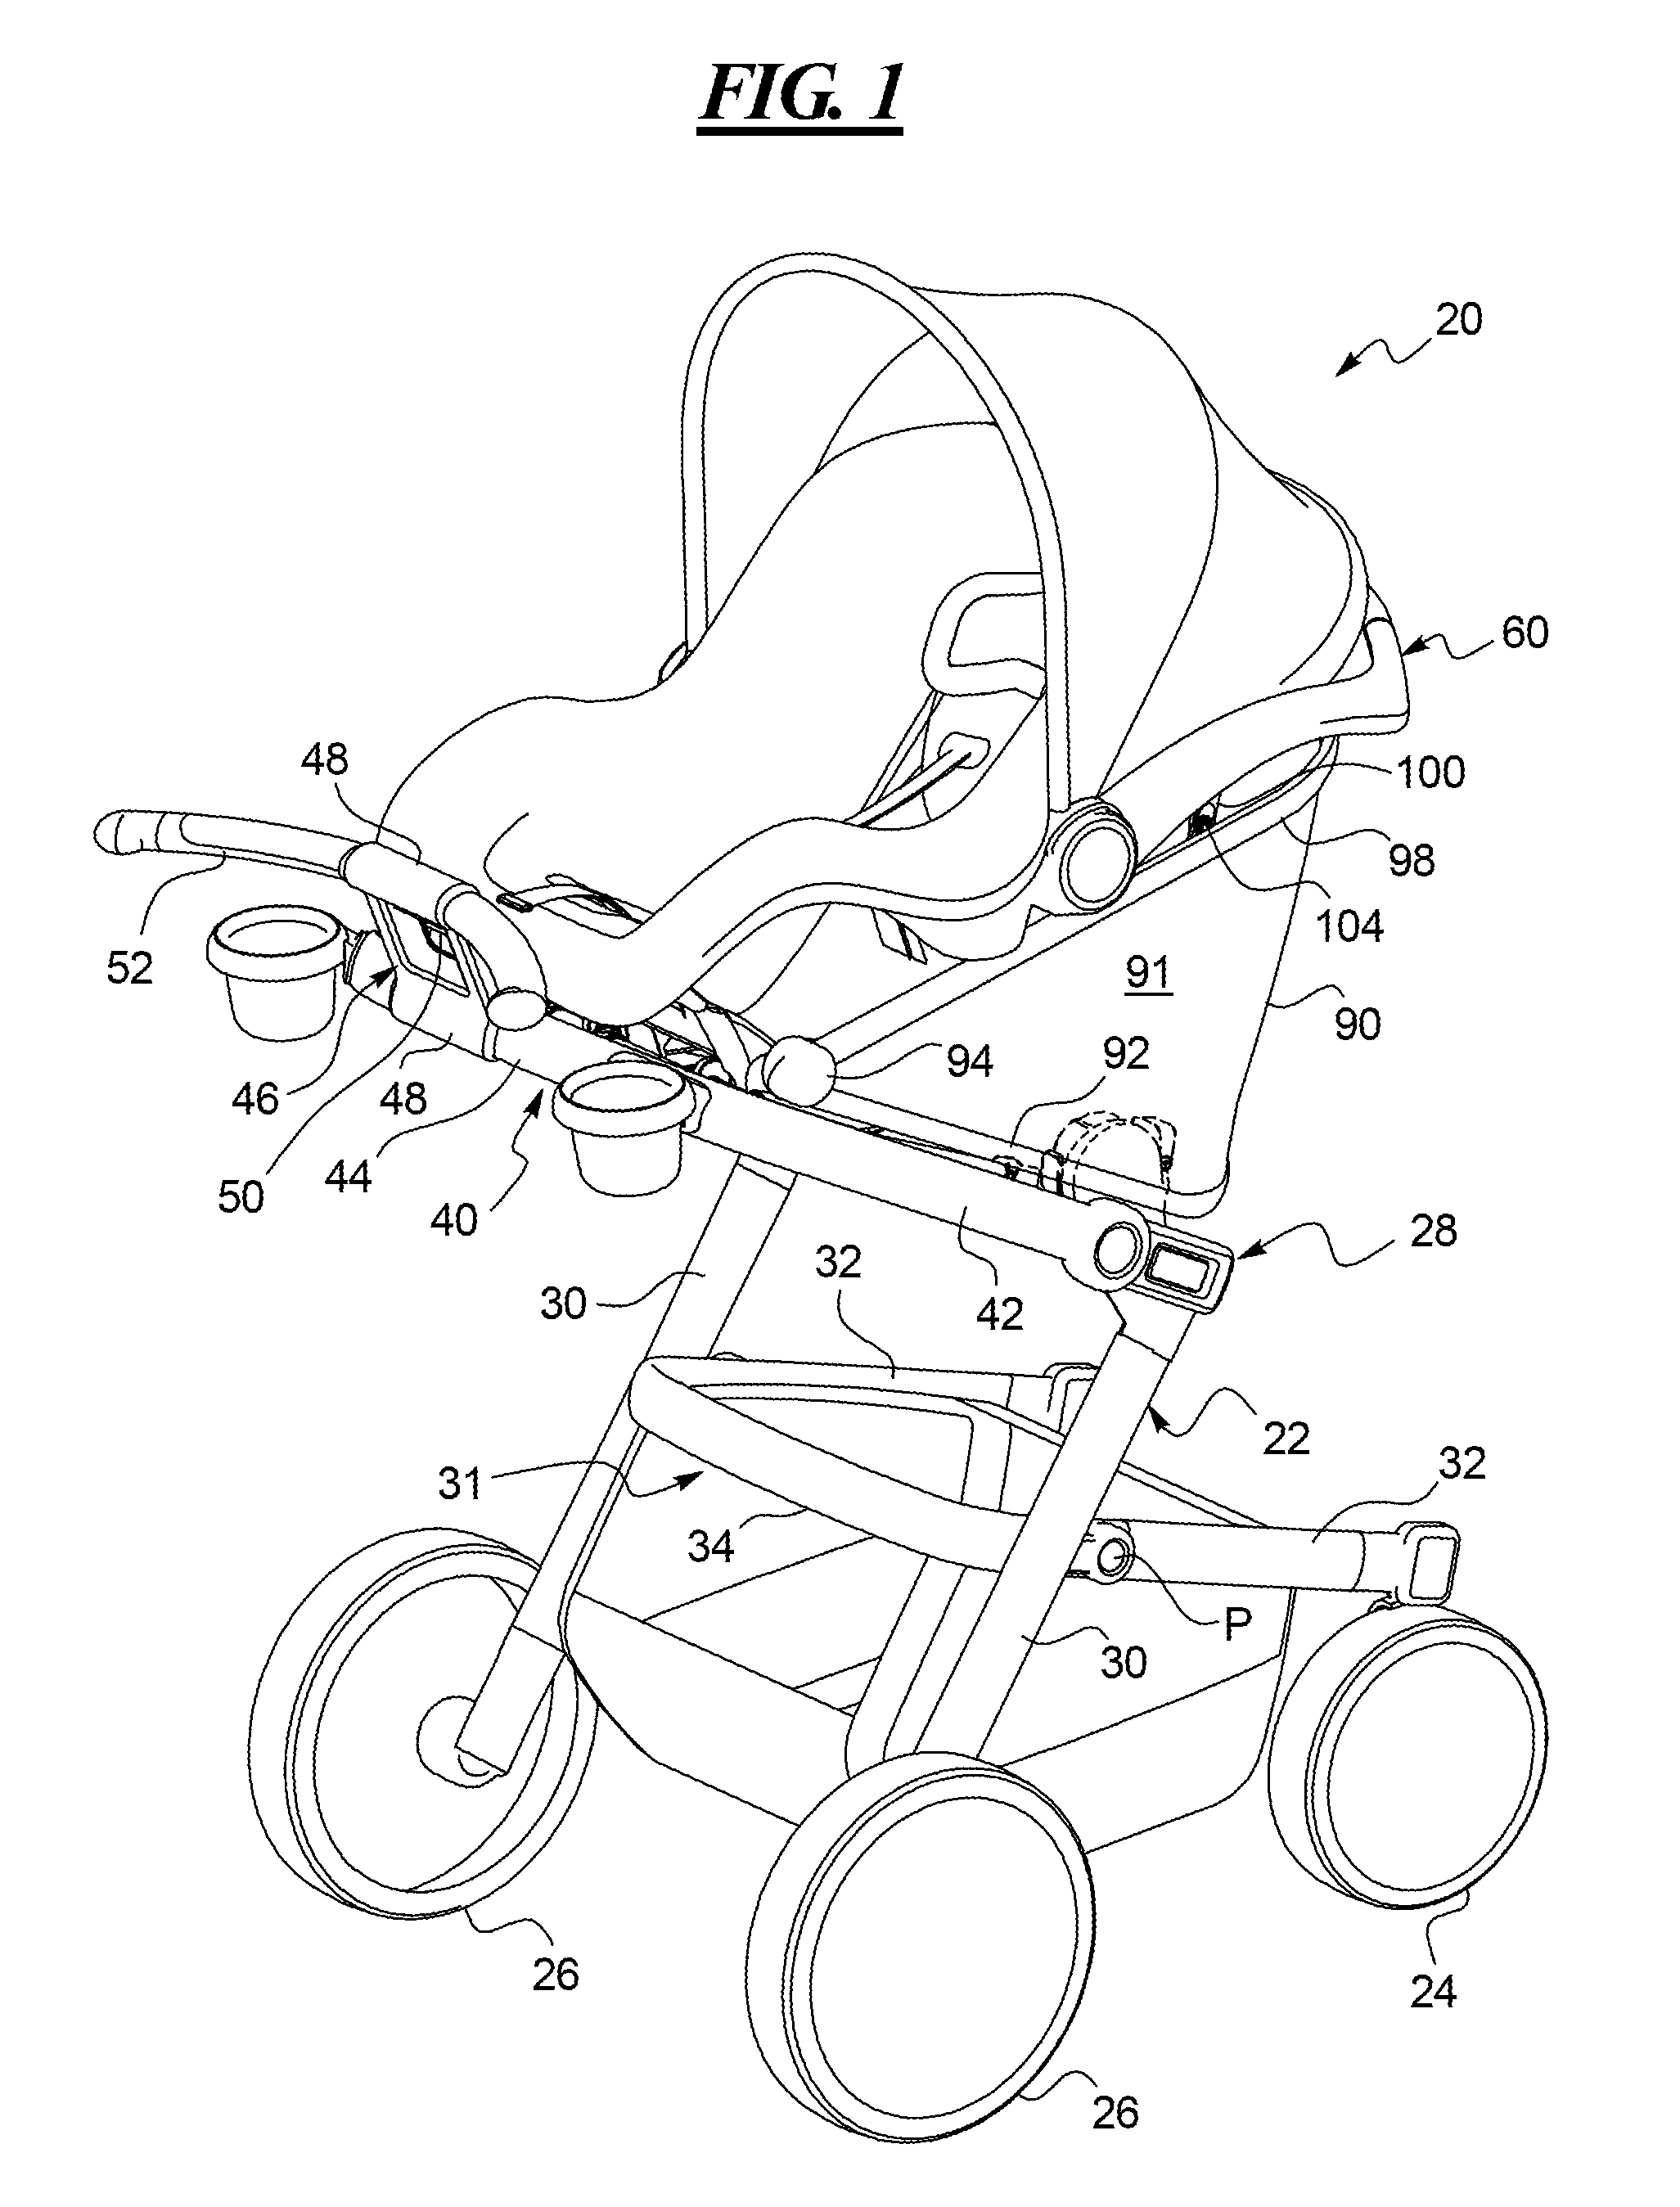 Stroller Adapter for an Infant Car Seat